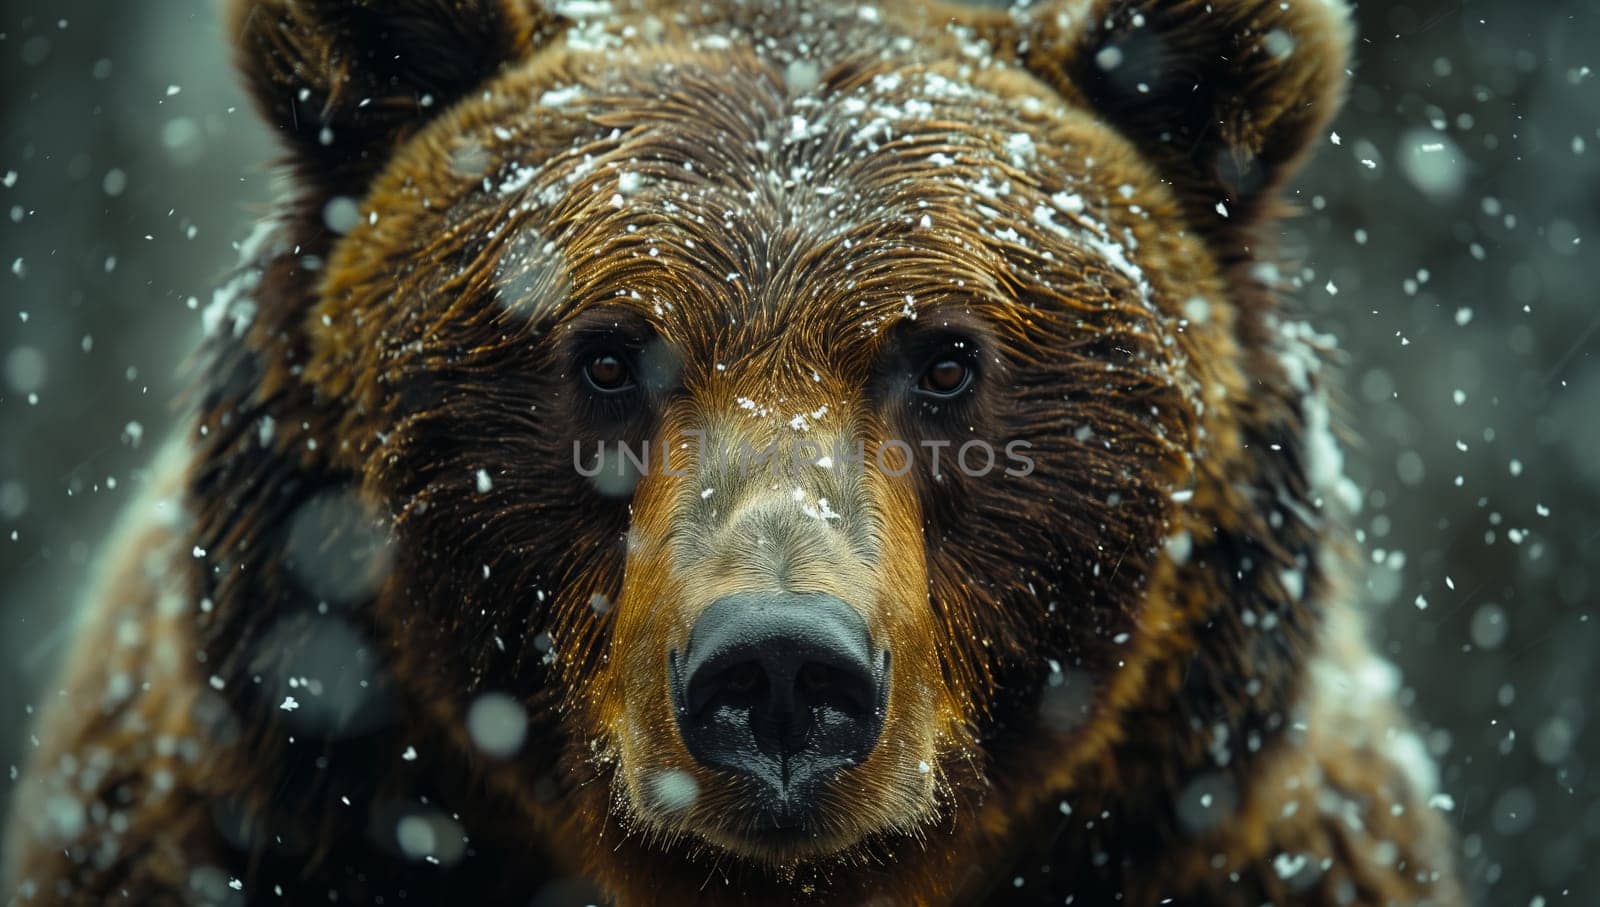 A carnivorous brown bear, a terrestrial animal, stands in the snow with its head turned towards the camera. Its fur and whiskers create a distinctive pattern against the white background